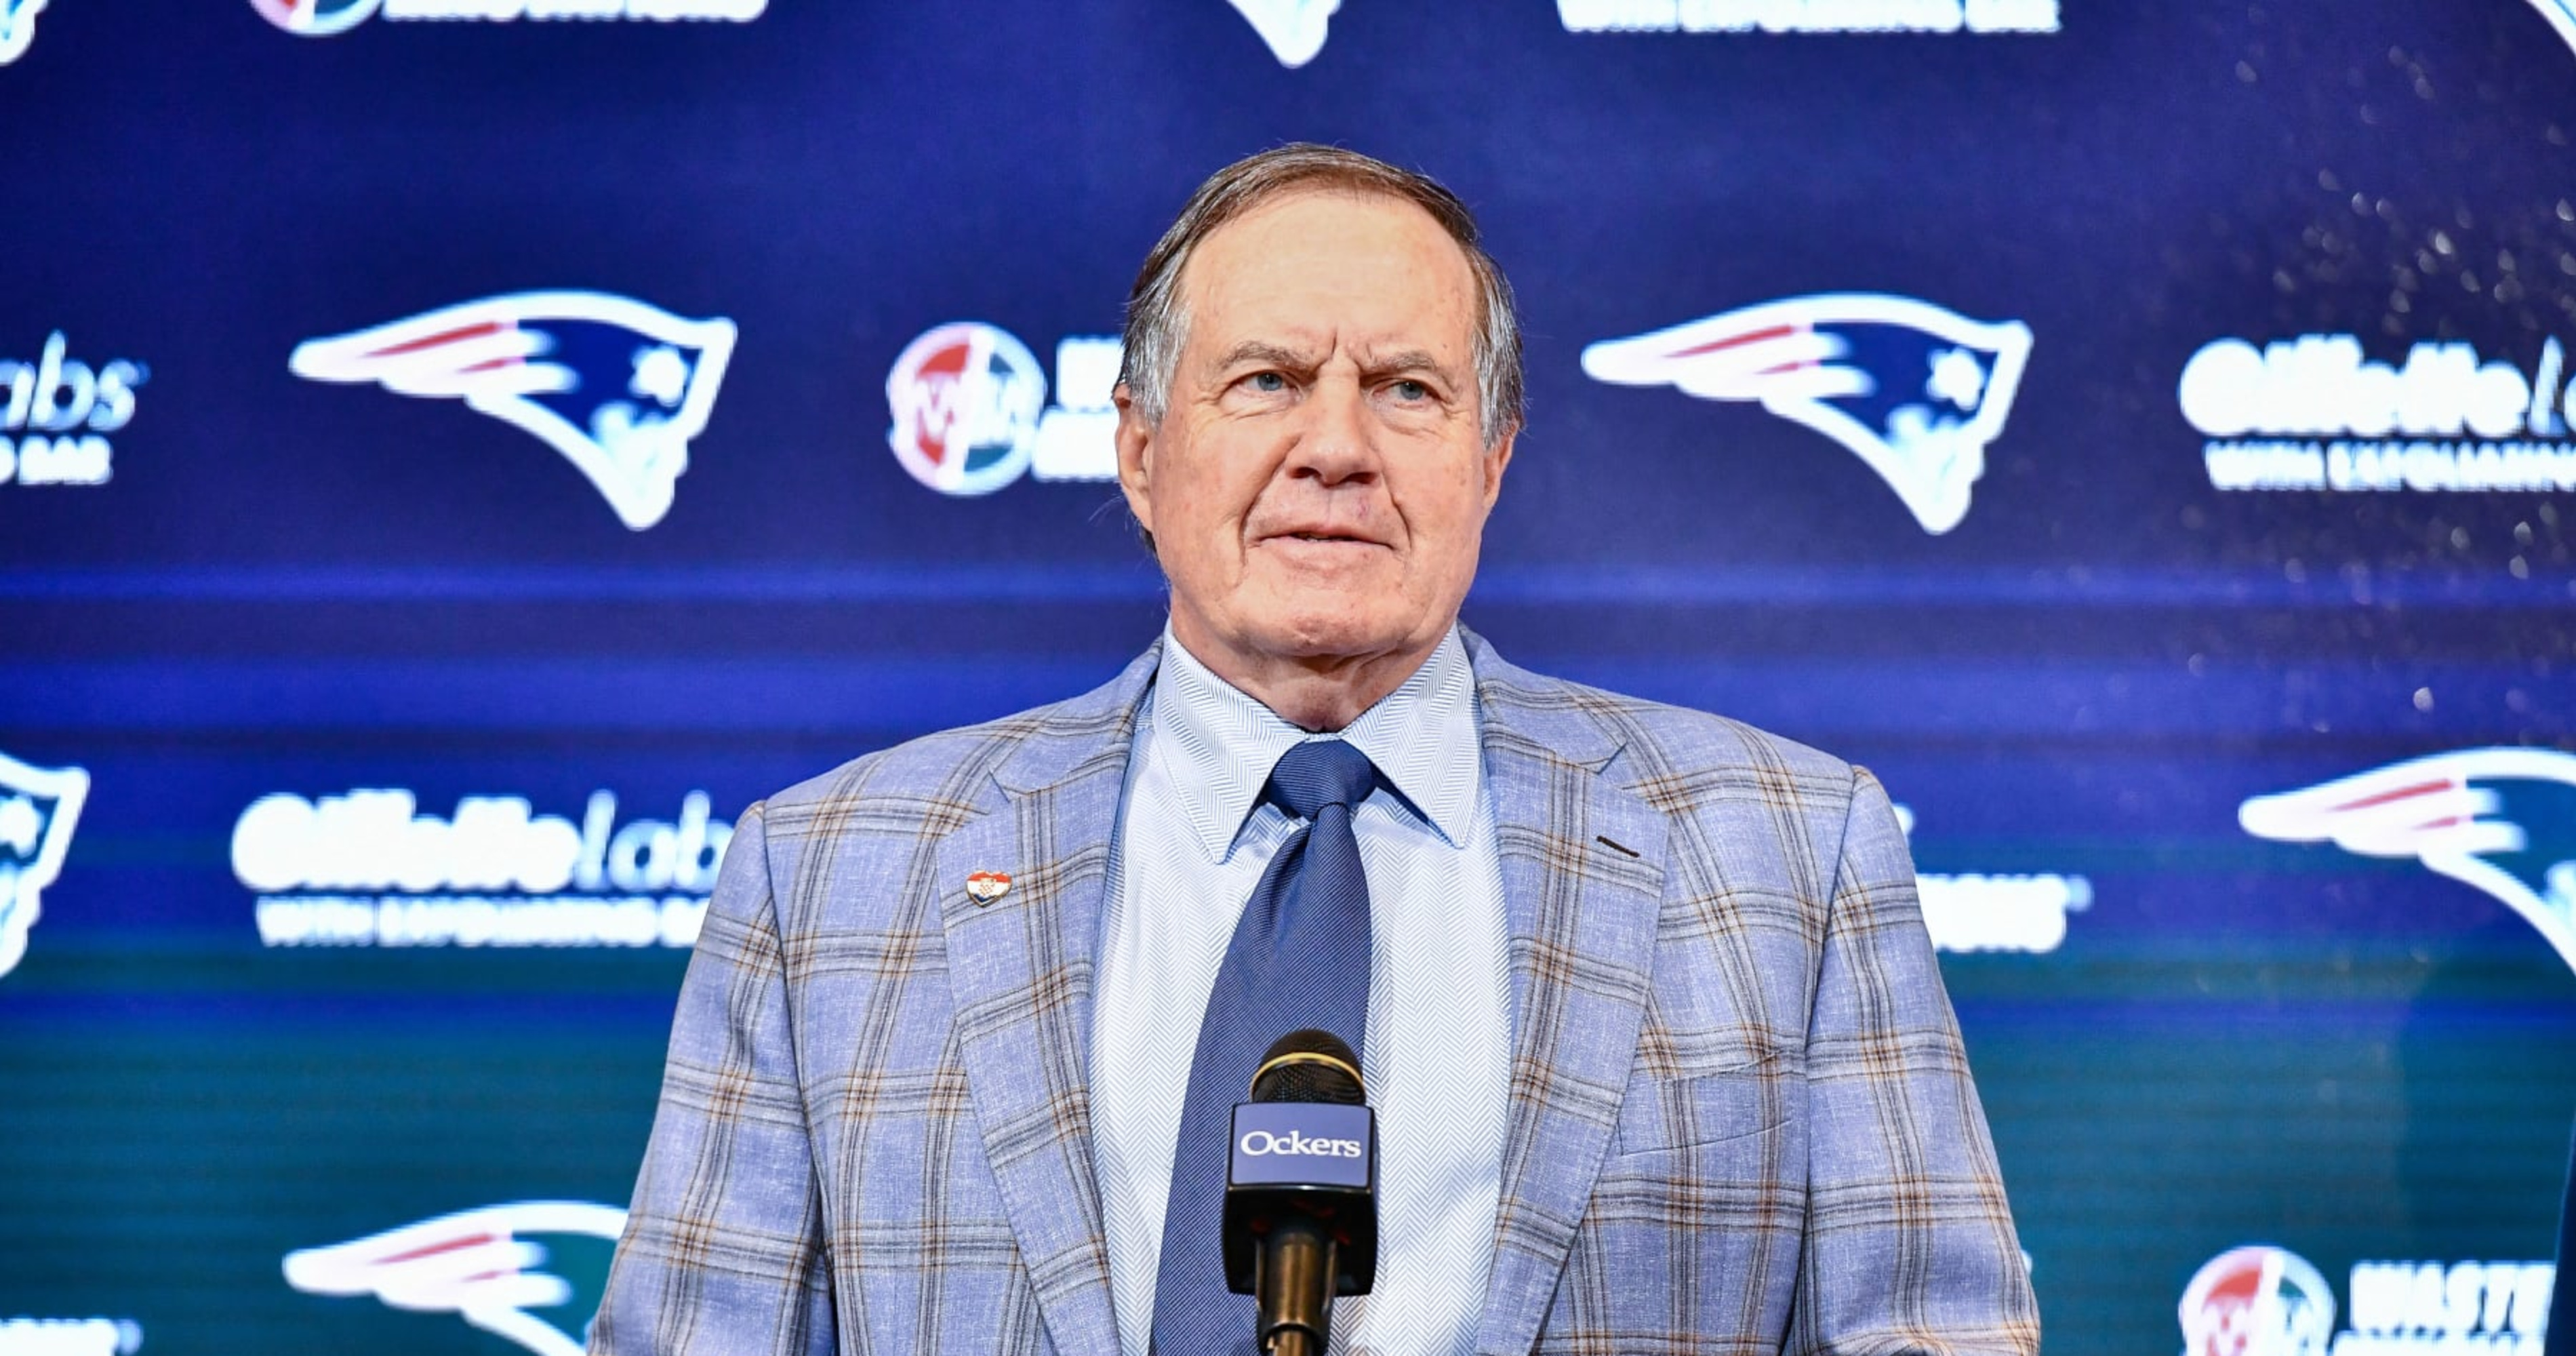 NFL Rumors: Rival Exec Believes Cowboys Could Pursue Belichick to Replace McCarthy